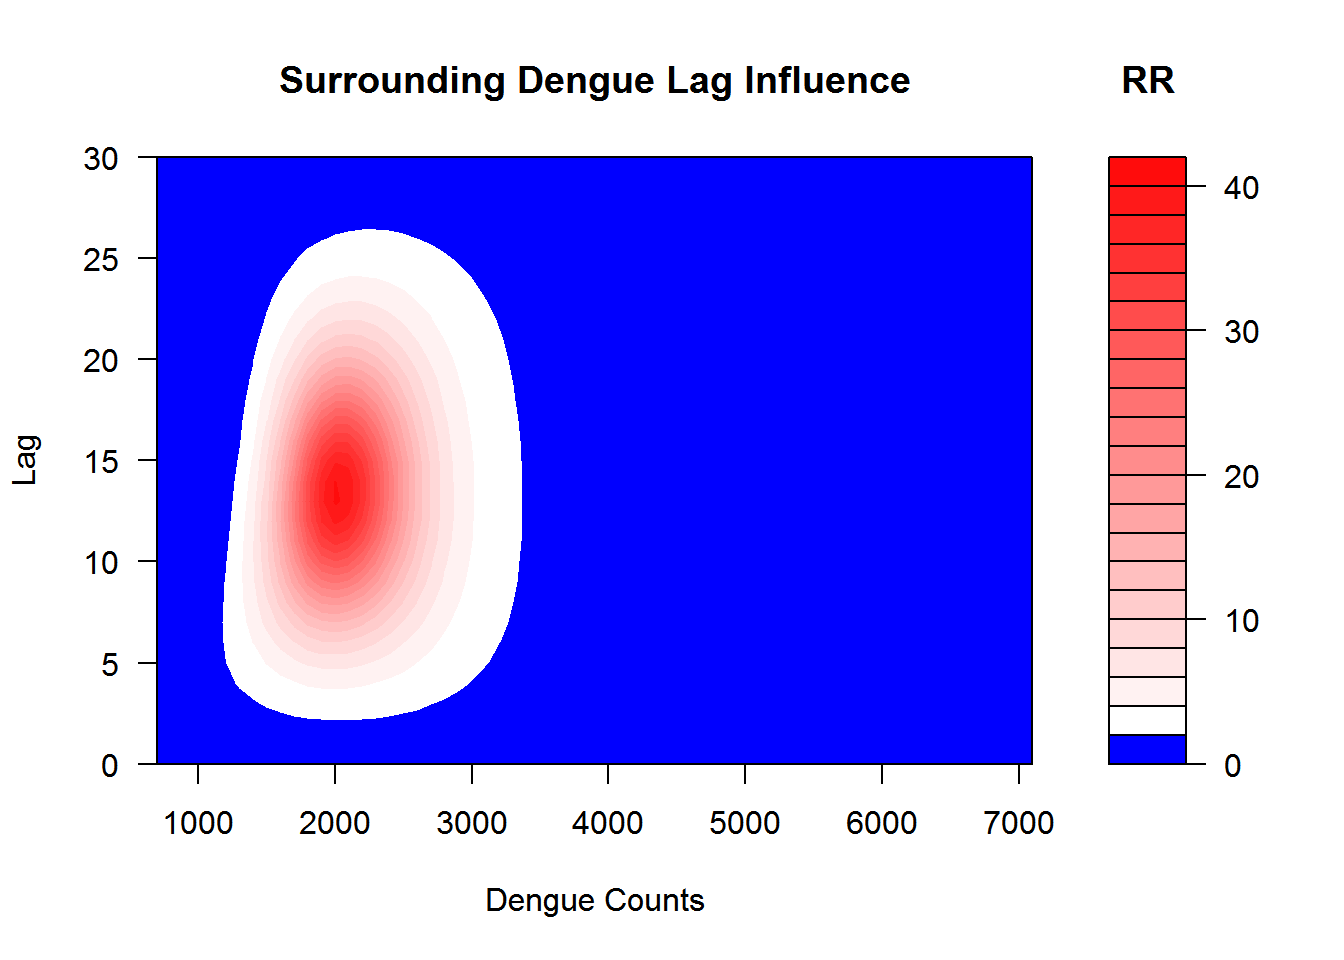 This shows the relation between the case intensity and dengue incidences in surrounding districts at the lag months